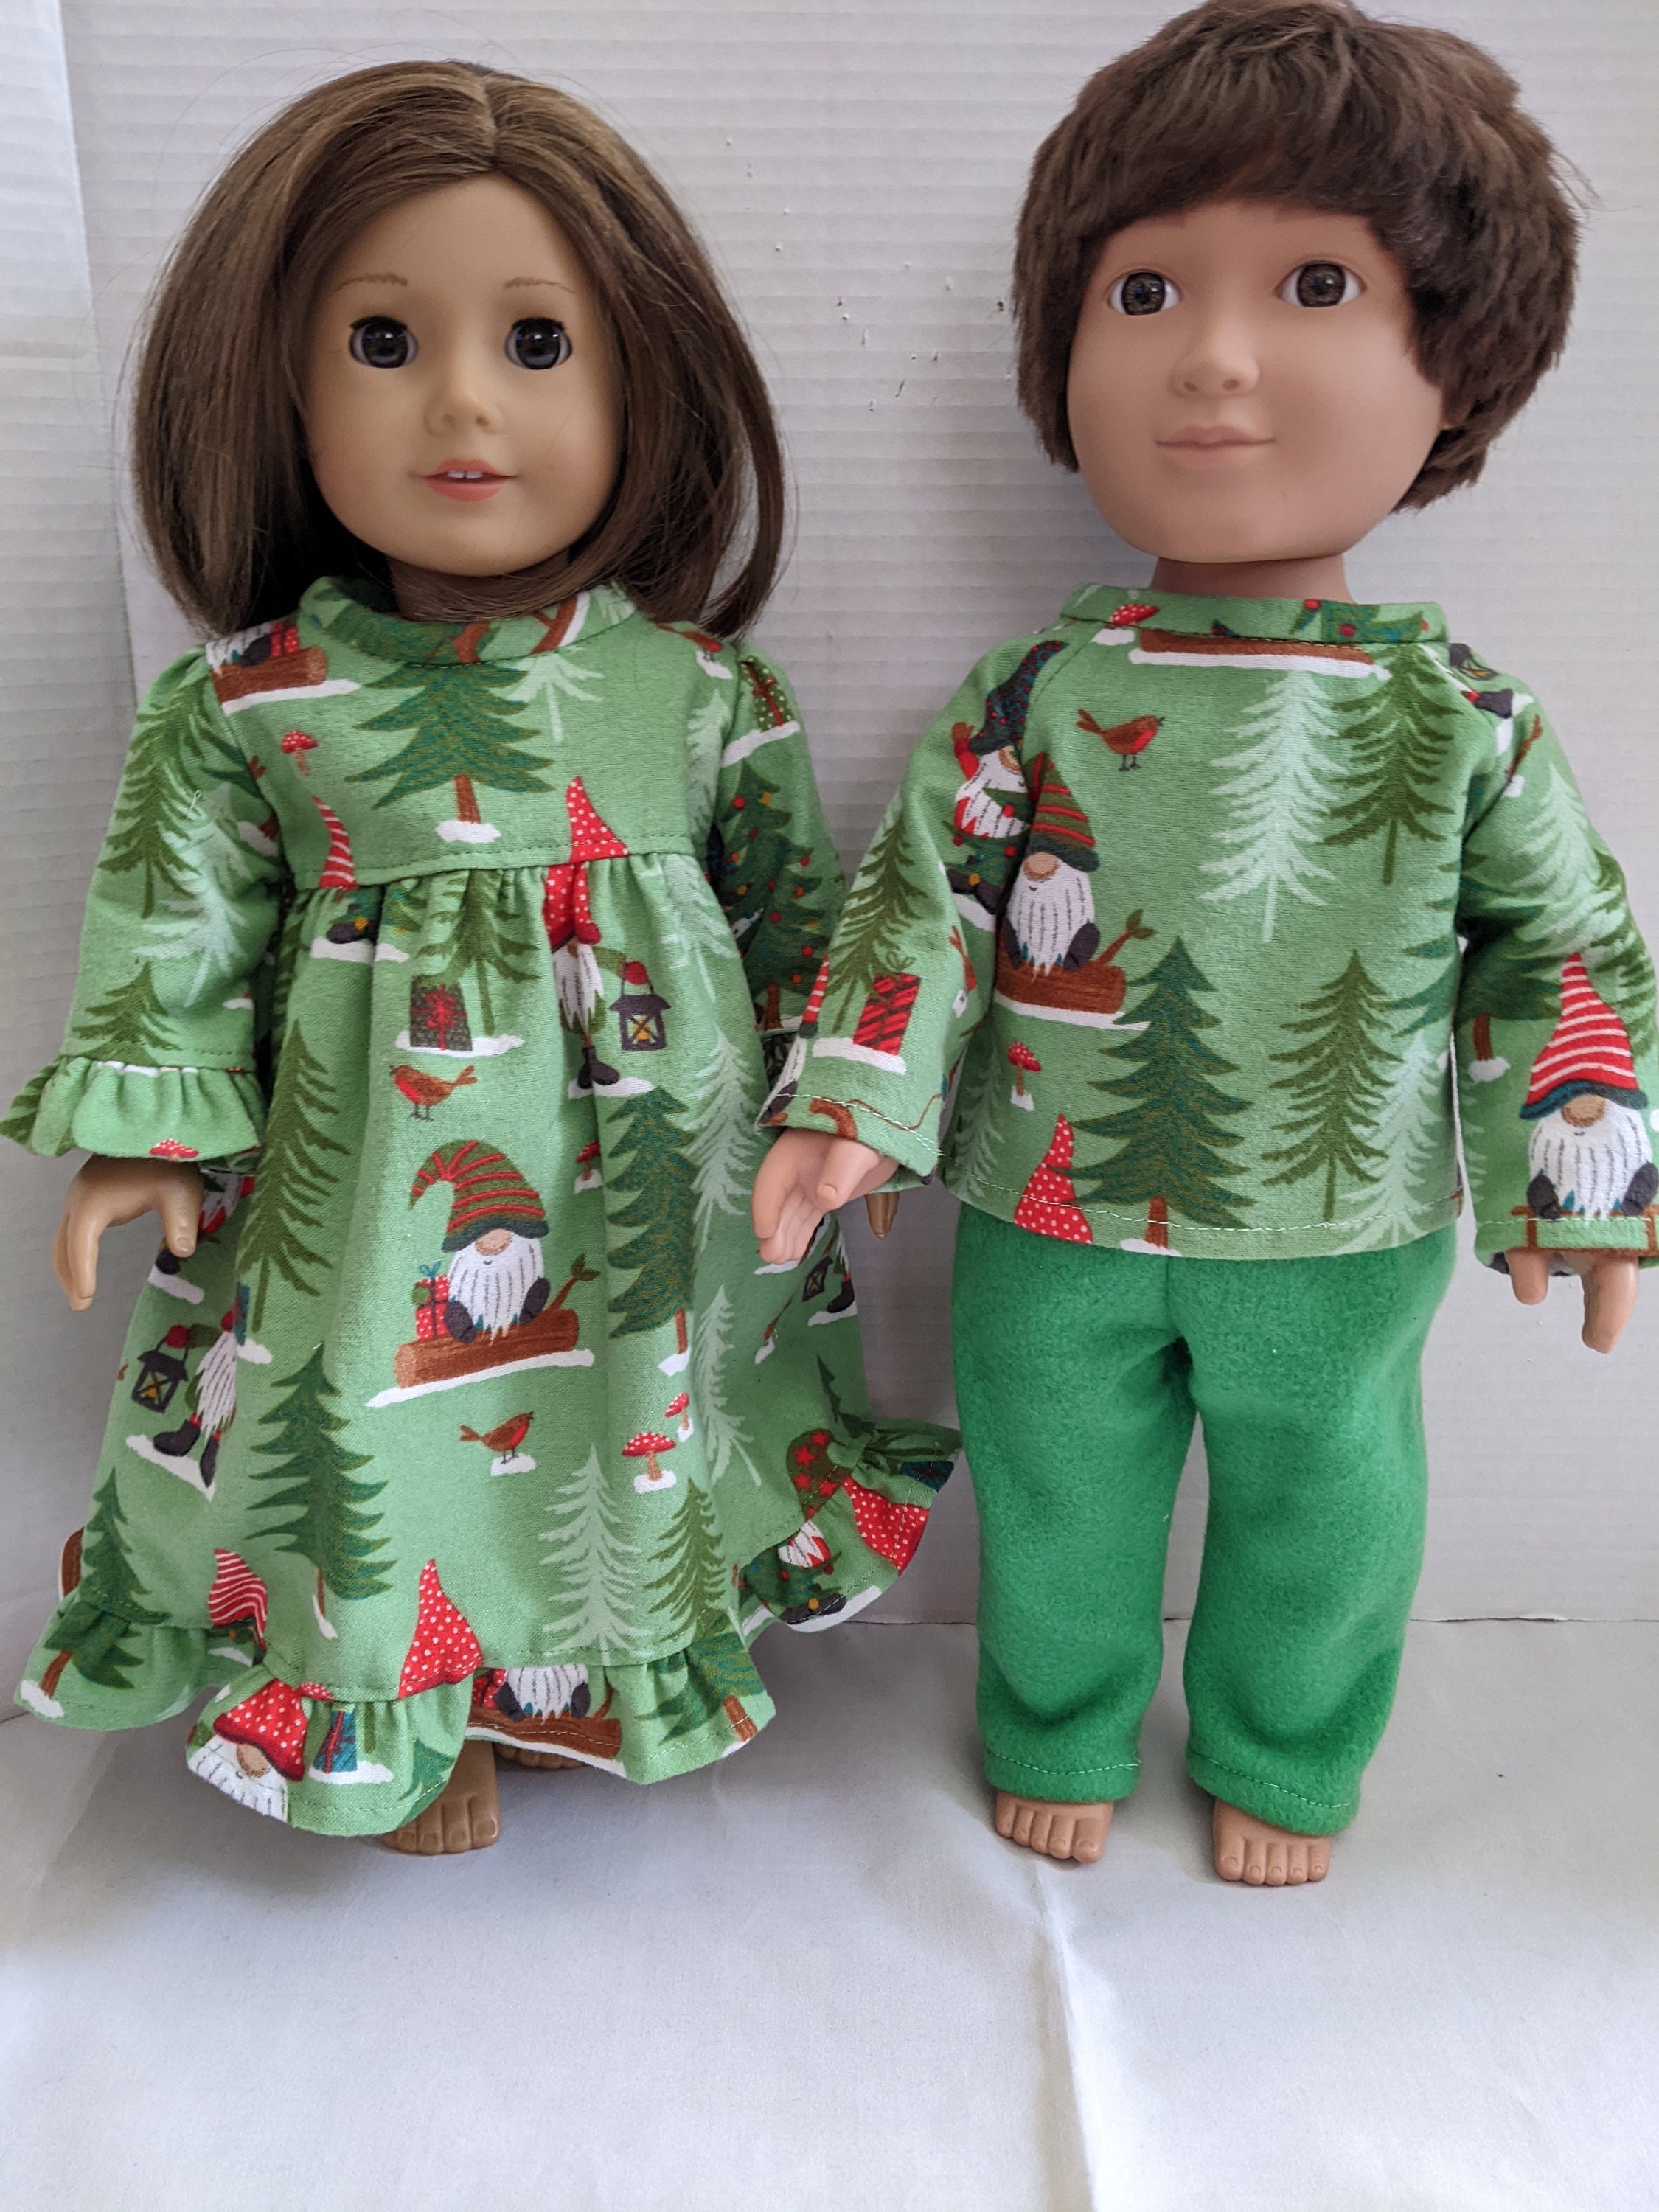 Maplelea : Matching Family PJs - The whole family can match including your  18 doll